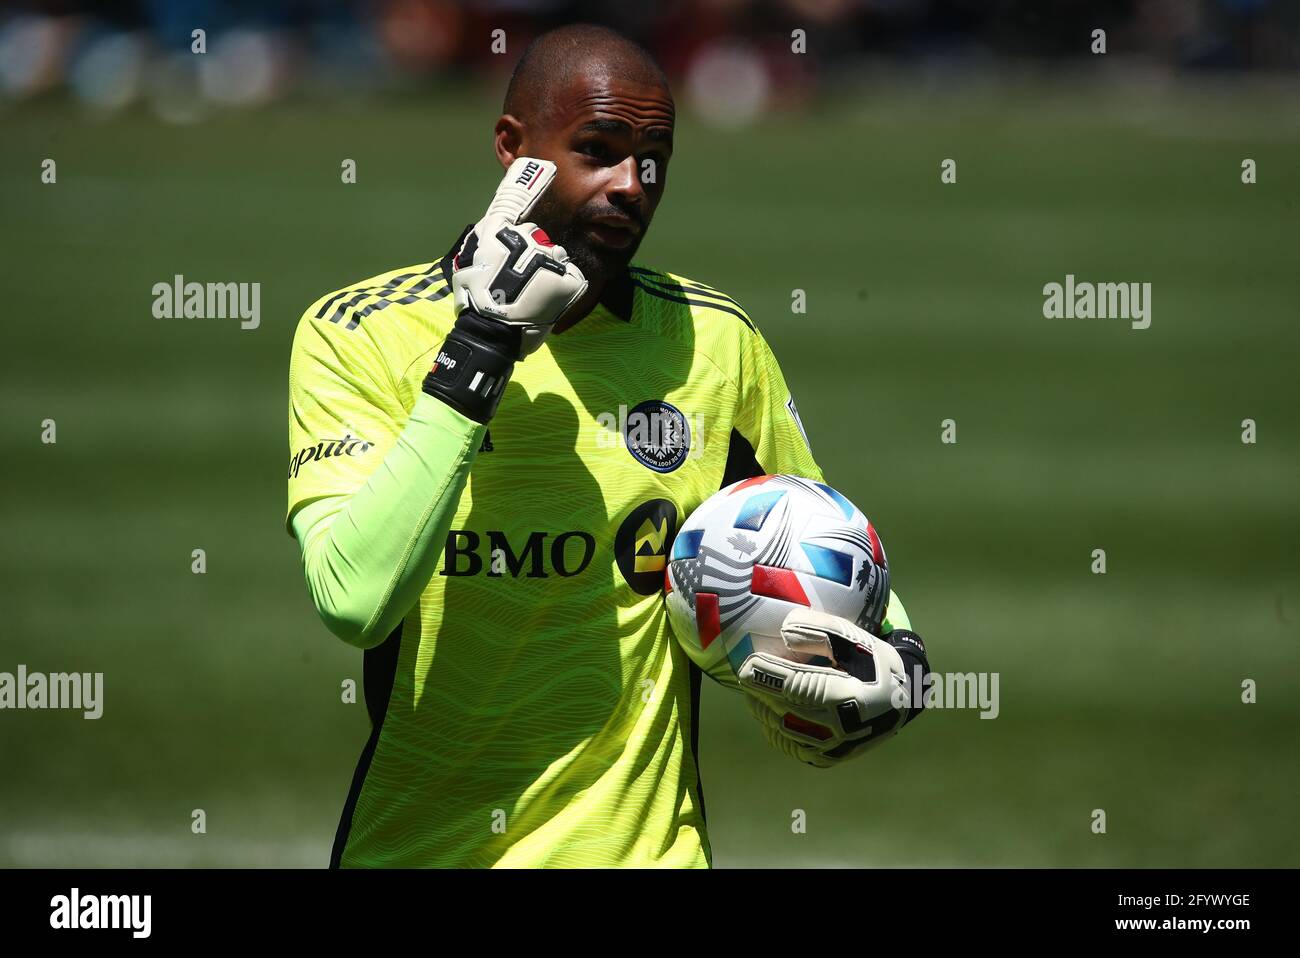 CF Montréal goalkeeper Clement Diop (23) points during a MLS match against the Chicago Fire FC at Soldier Field, Saturday, May 29, 2021, in Chicago, I Stock Photo